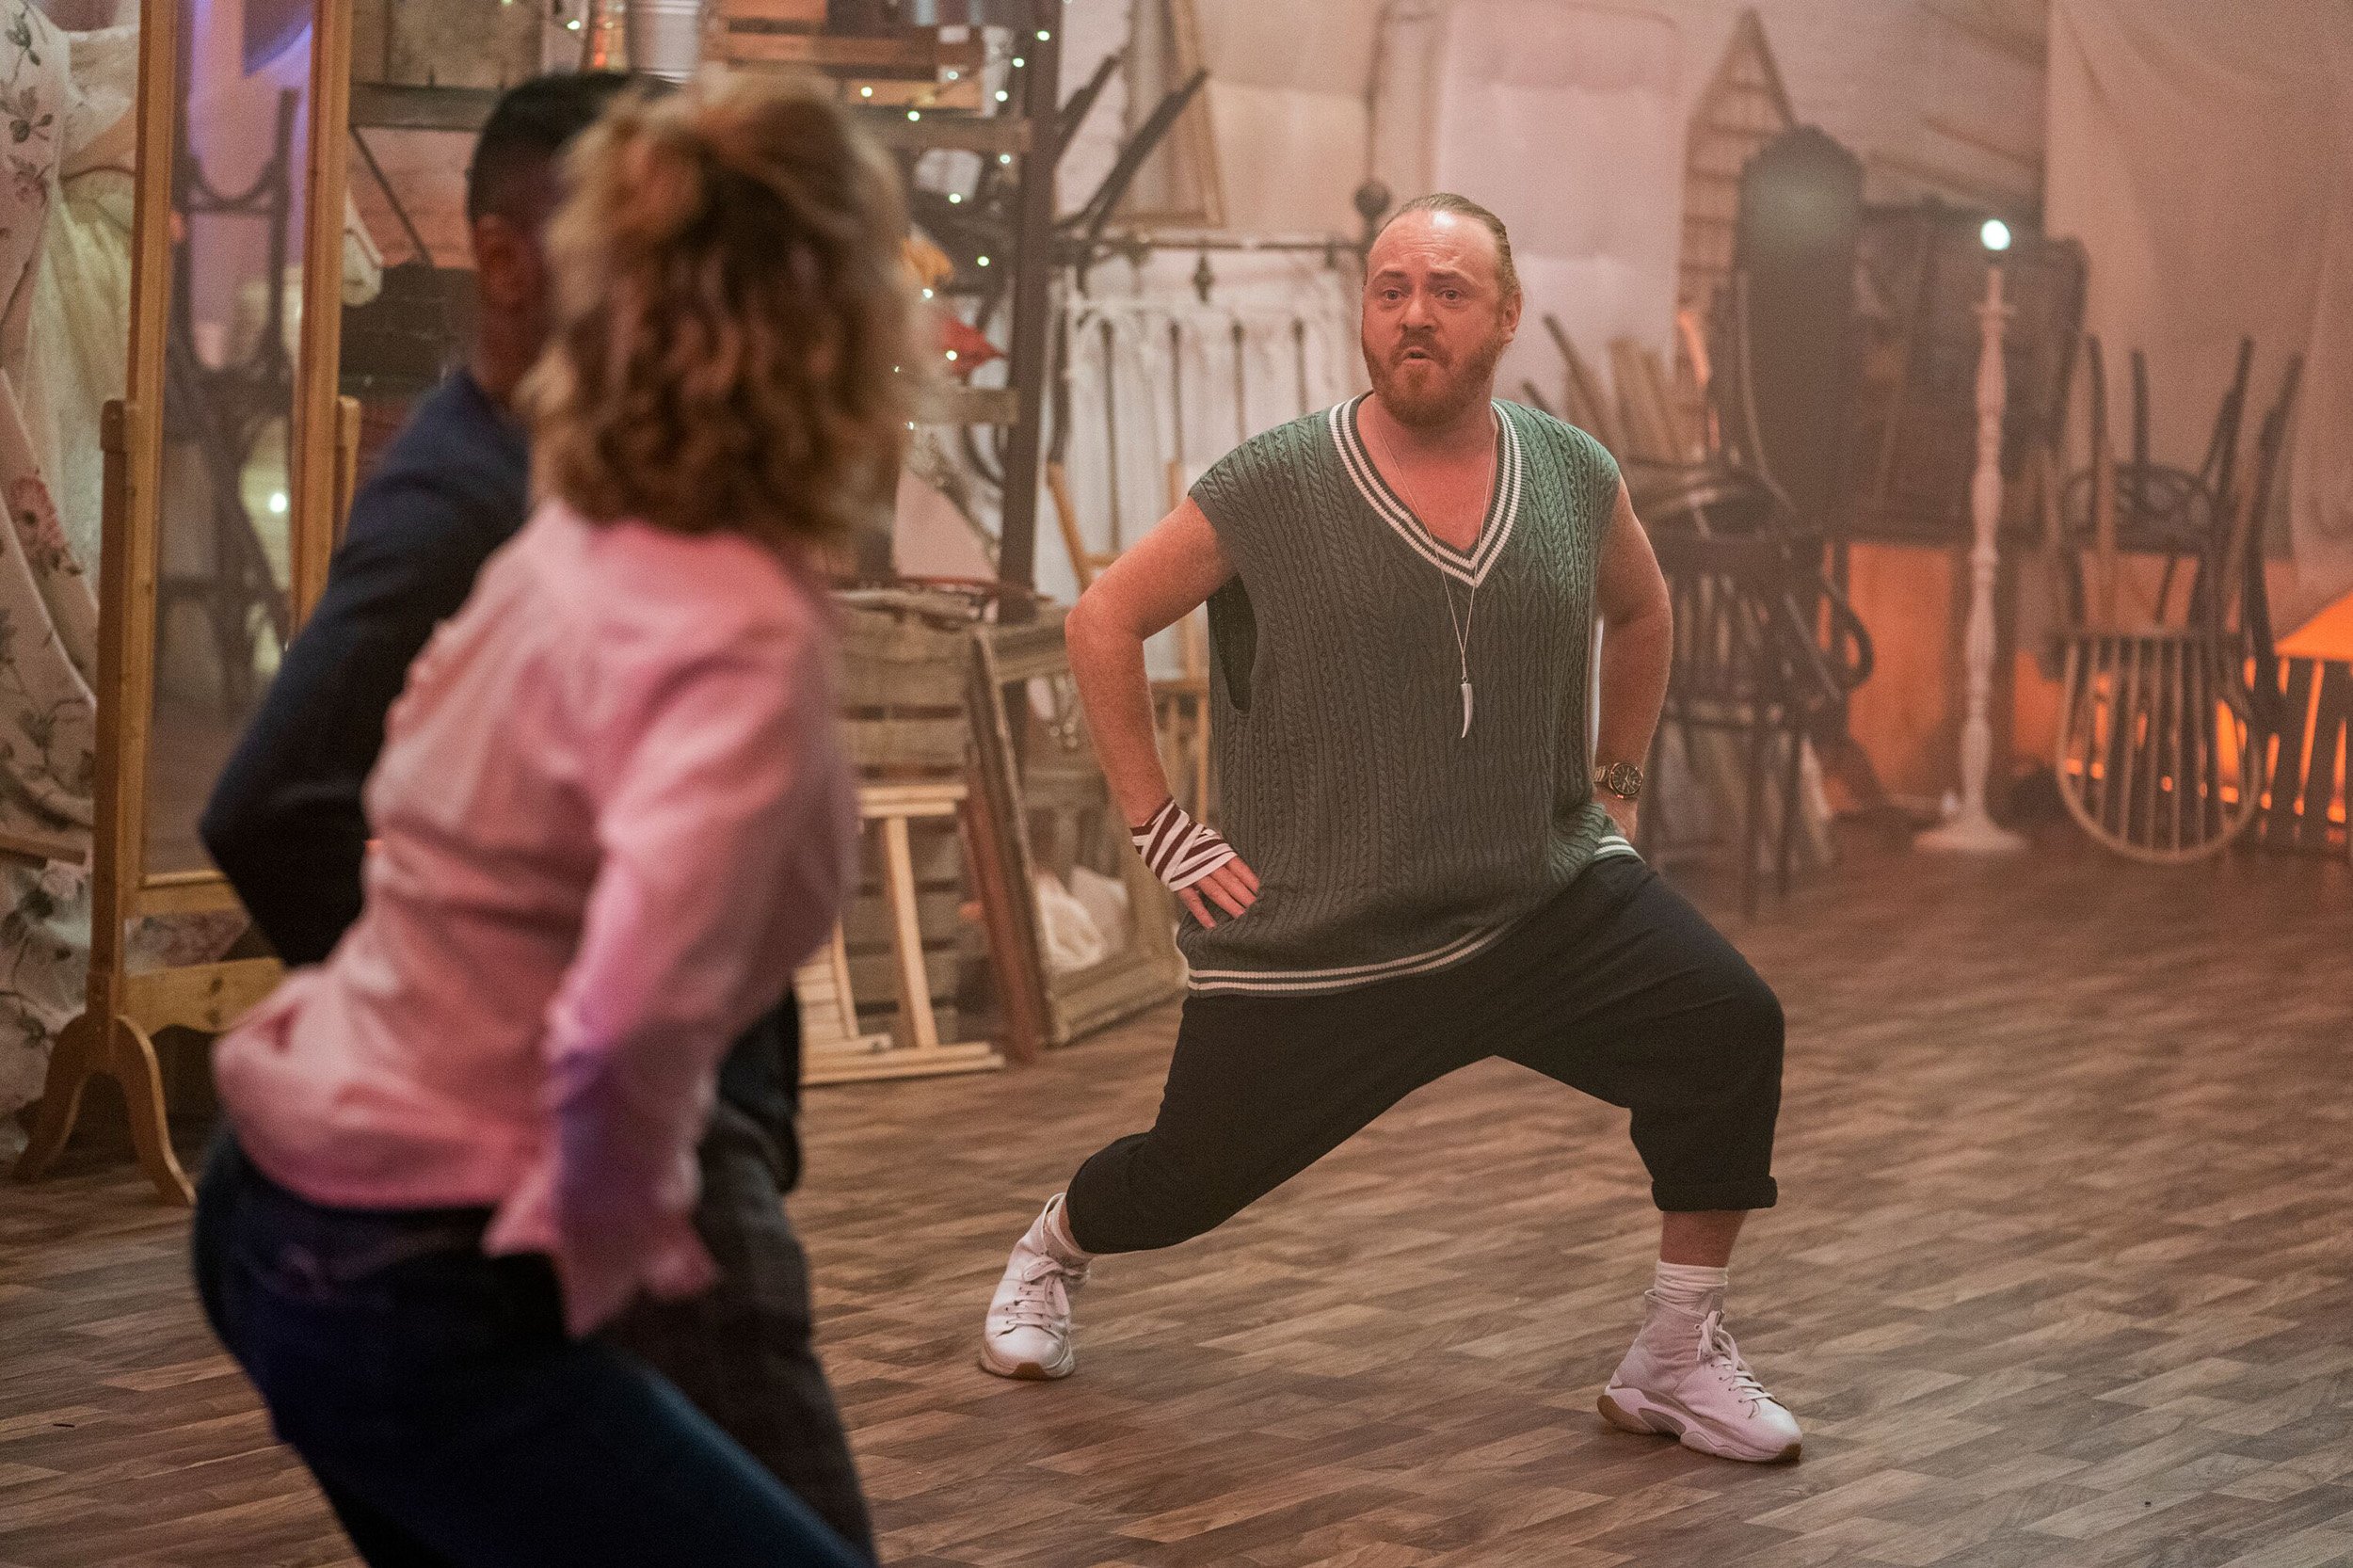  Episode 4  Co-host Keith Lemon offers stretching tips  Fremantle / Channel 4 